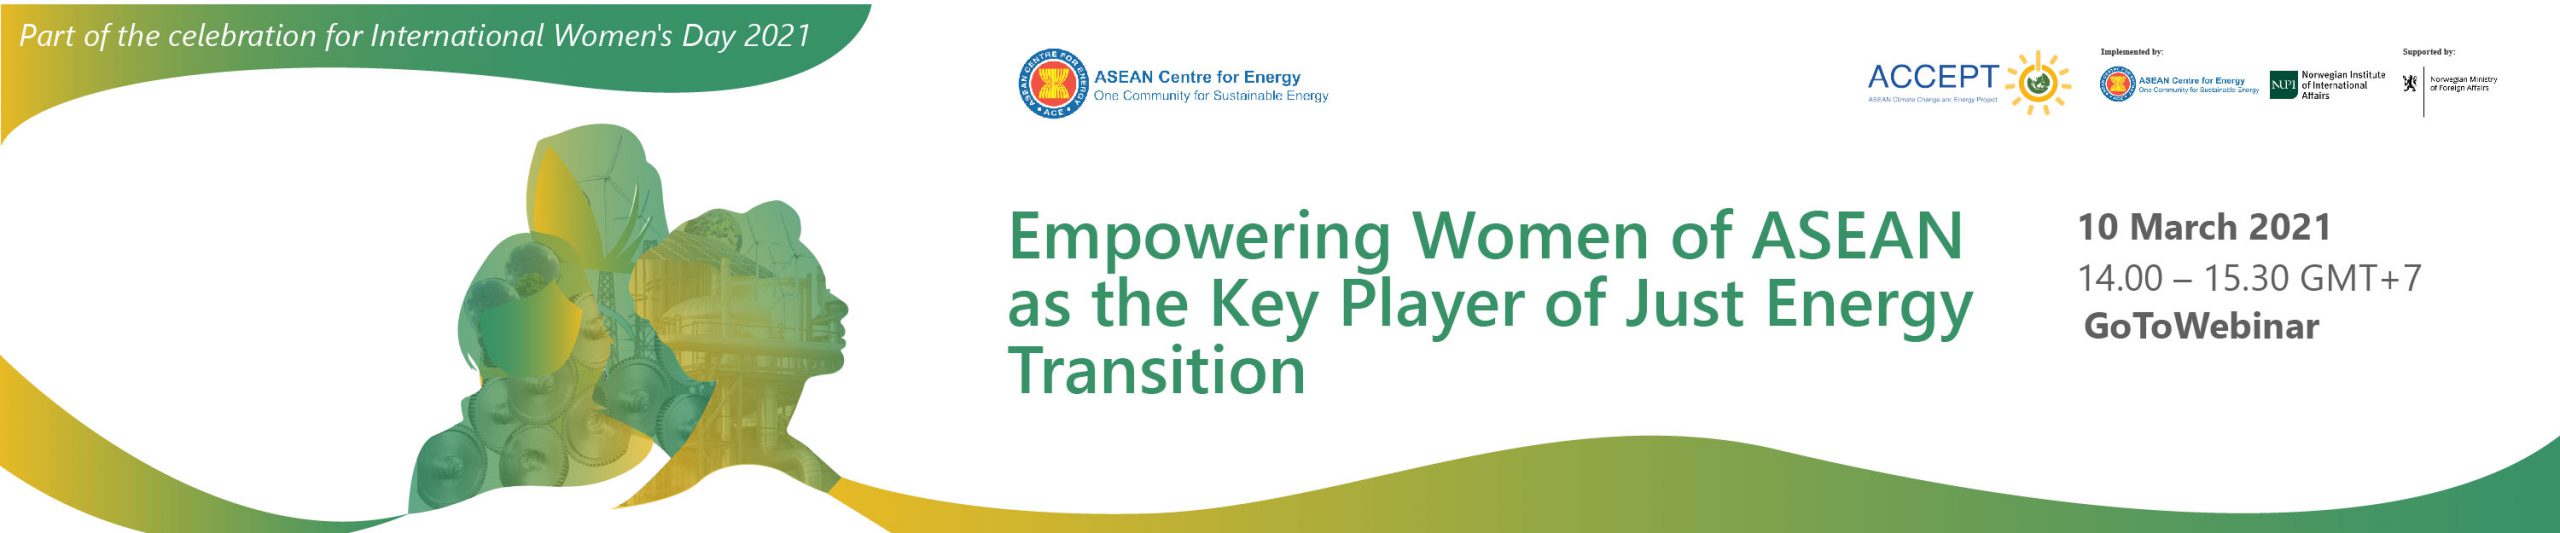 Empowering Women of ASEAN as the Key Player of Just Energy Transition